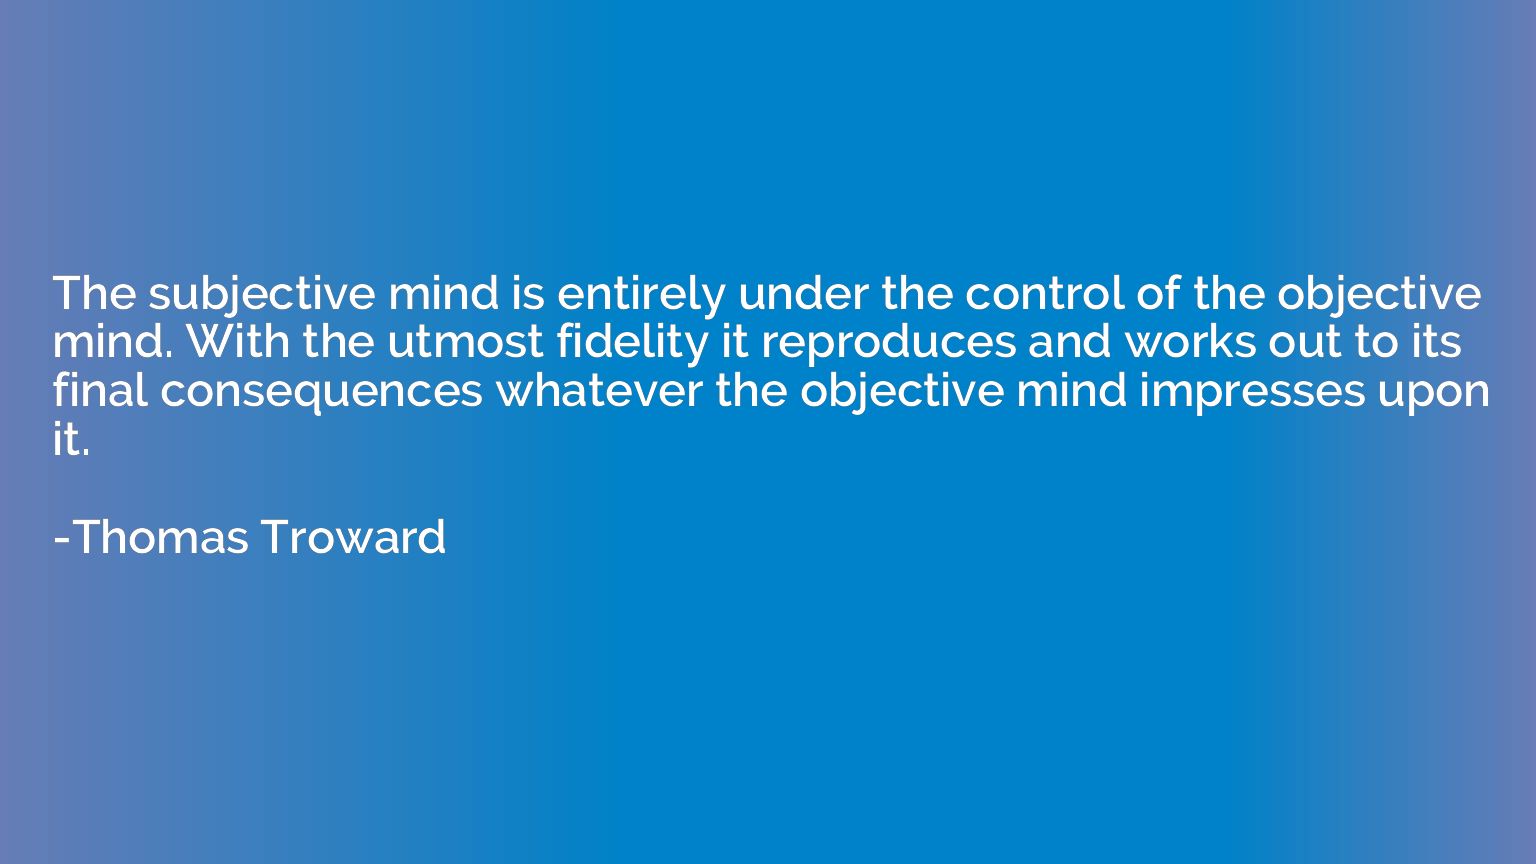 The subjective mind is entirely under the control of the obj